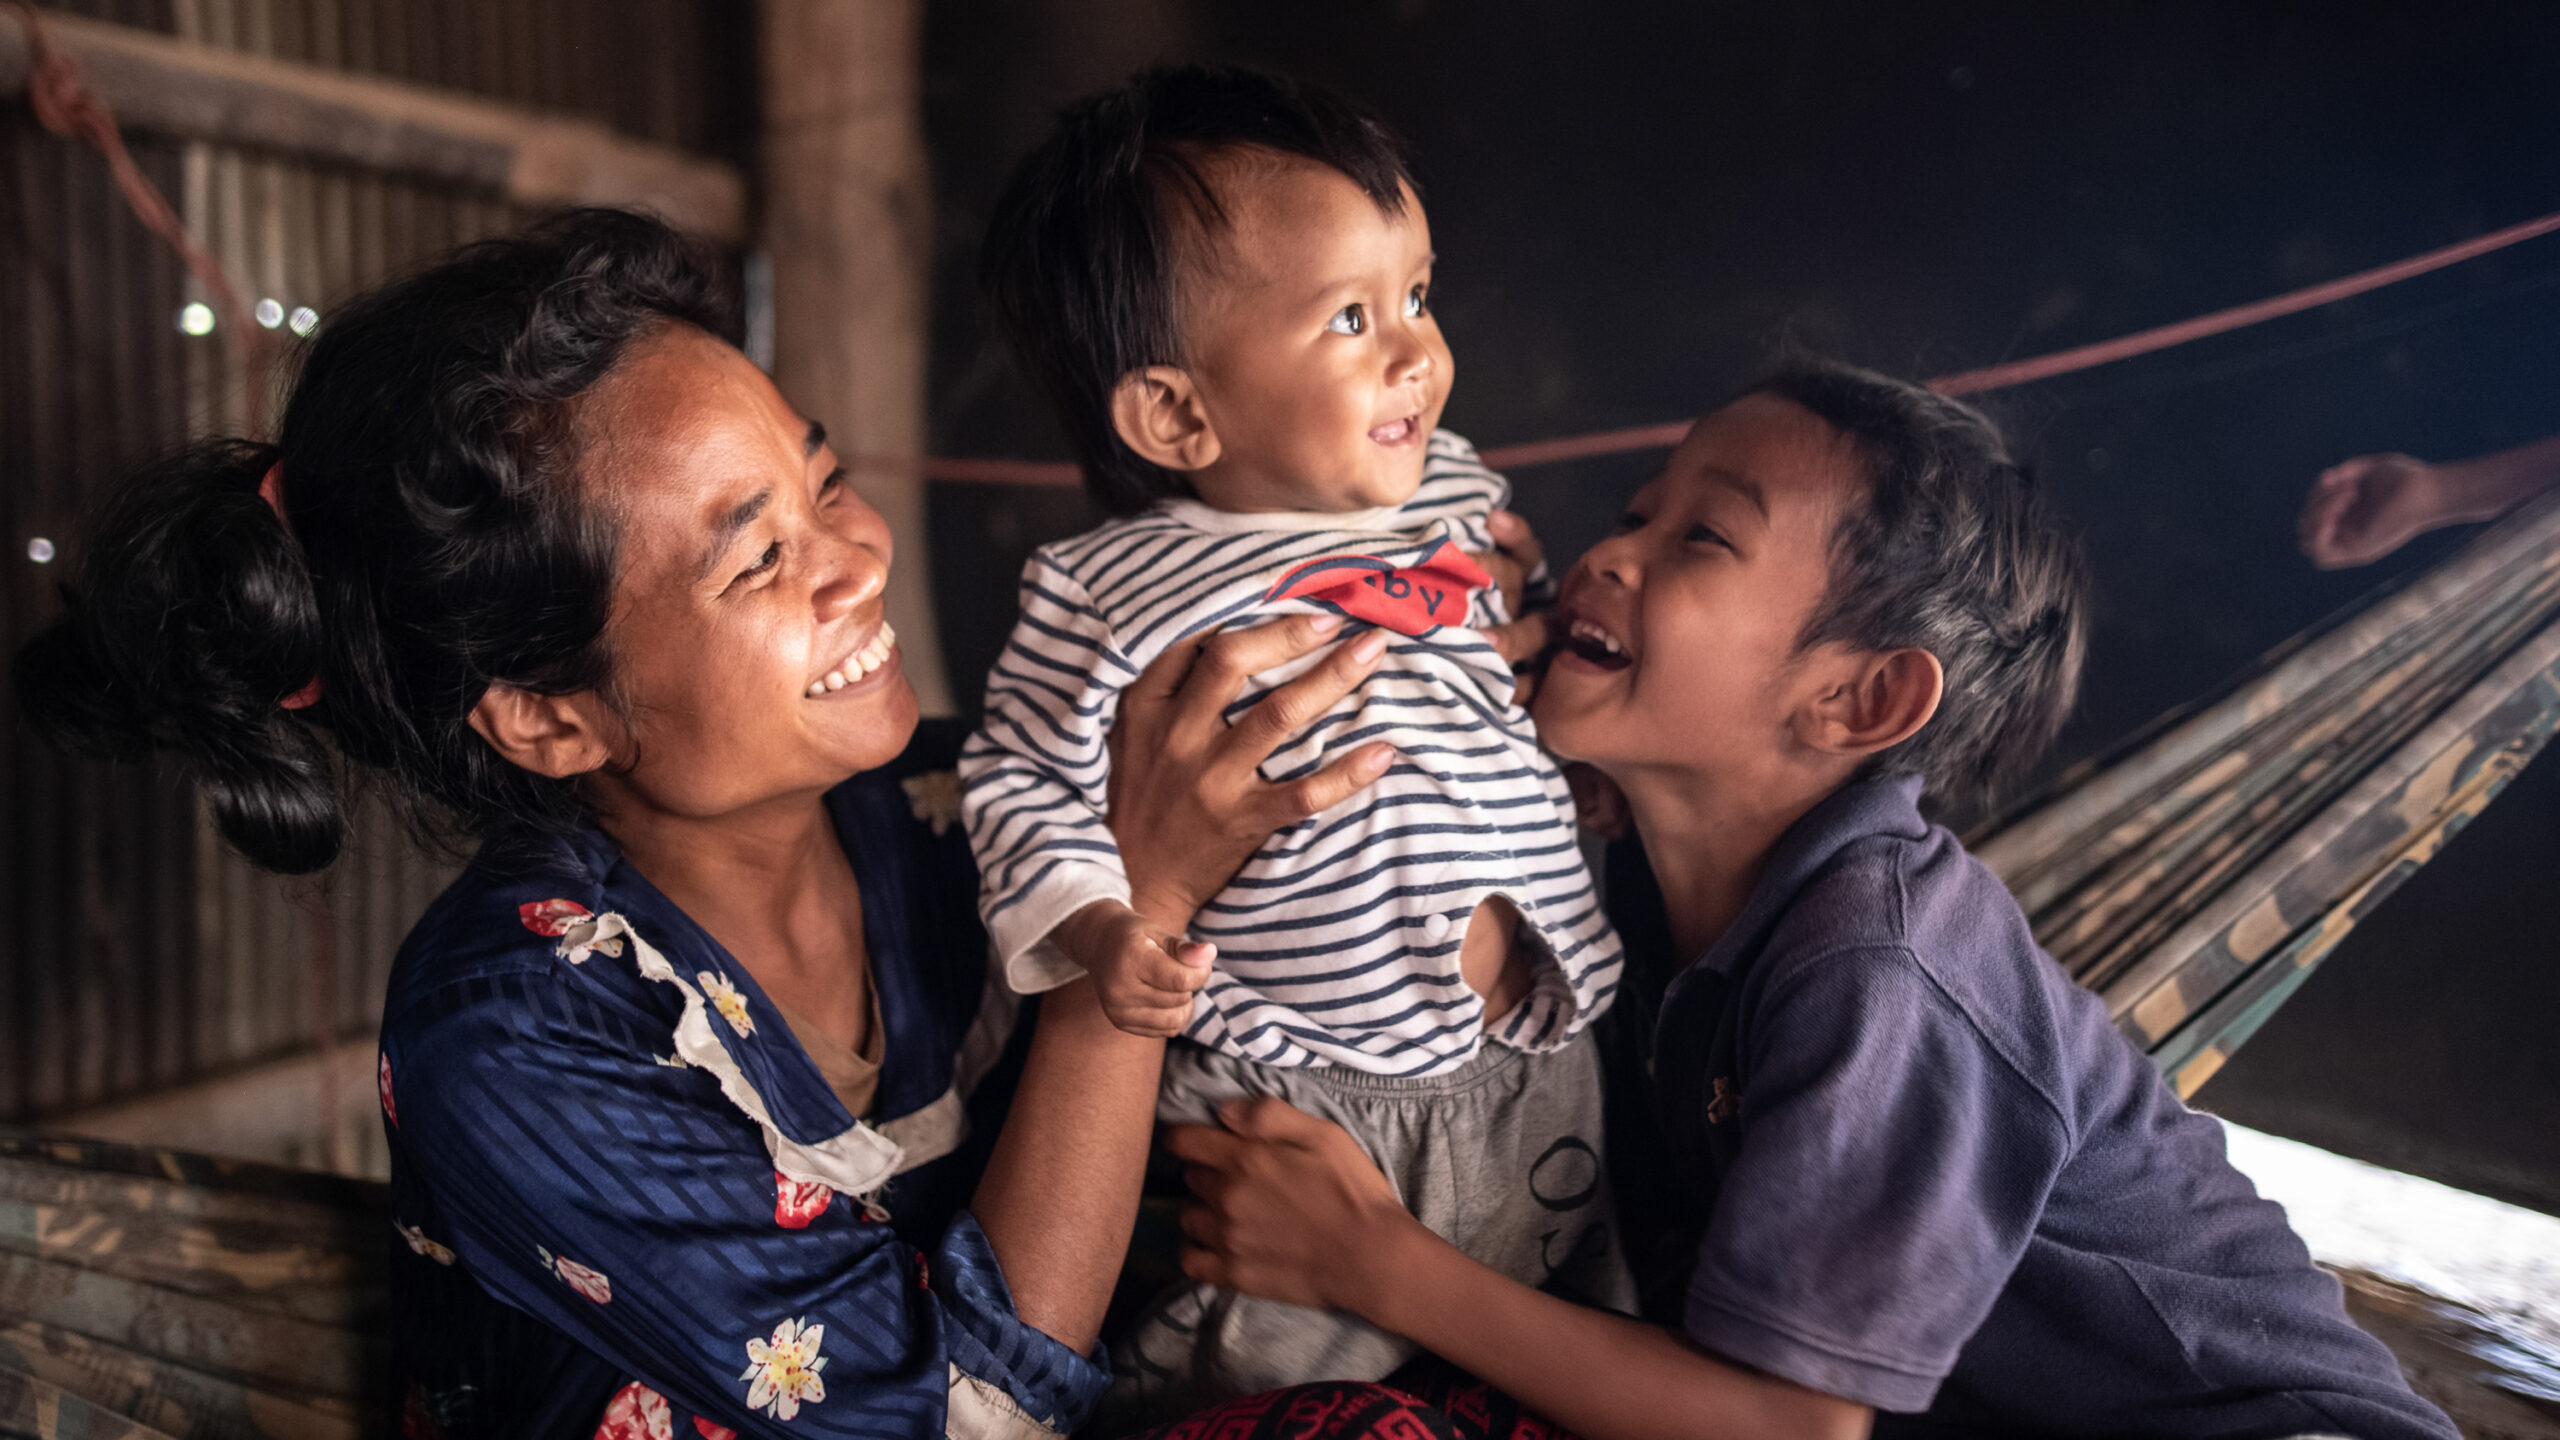 Ten-month-old Ahmin Esas, who was born with clubfoot, shares a moment with his mother and brother in the family's home